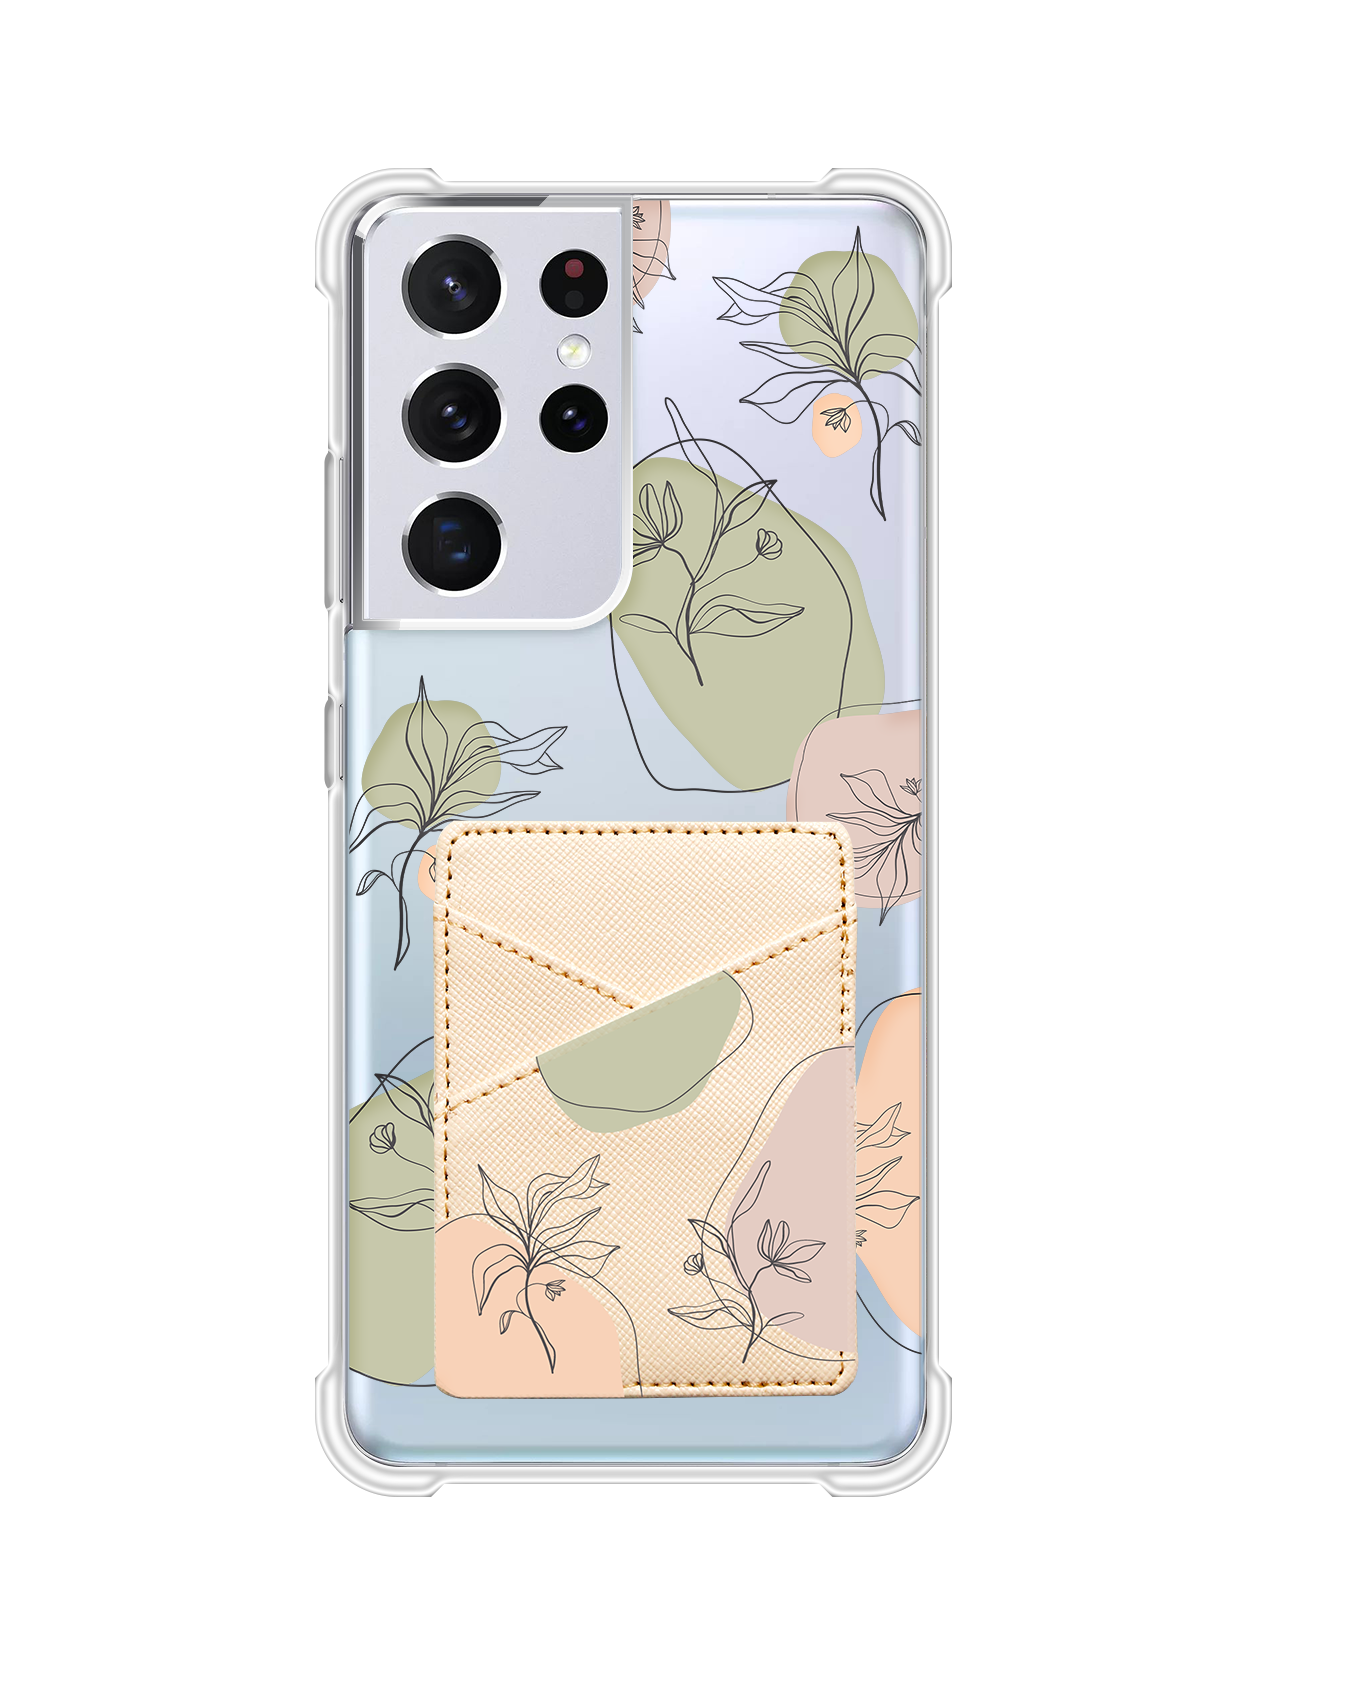 Android Phone Wallet Case - Sketchy Flower 1.0